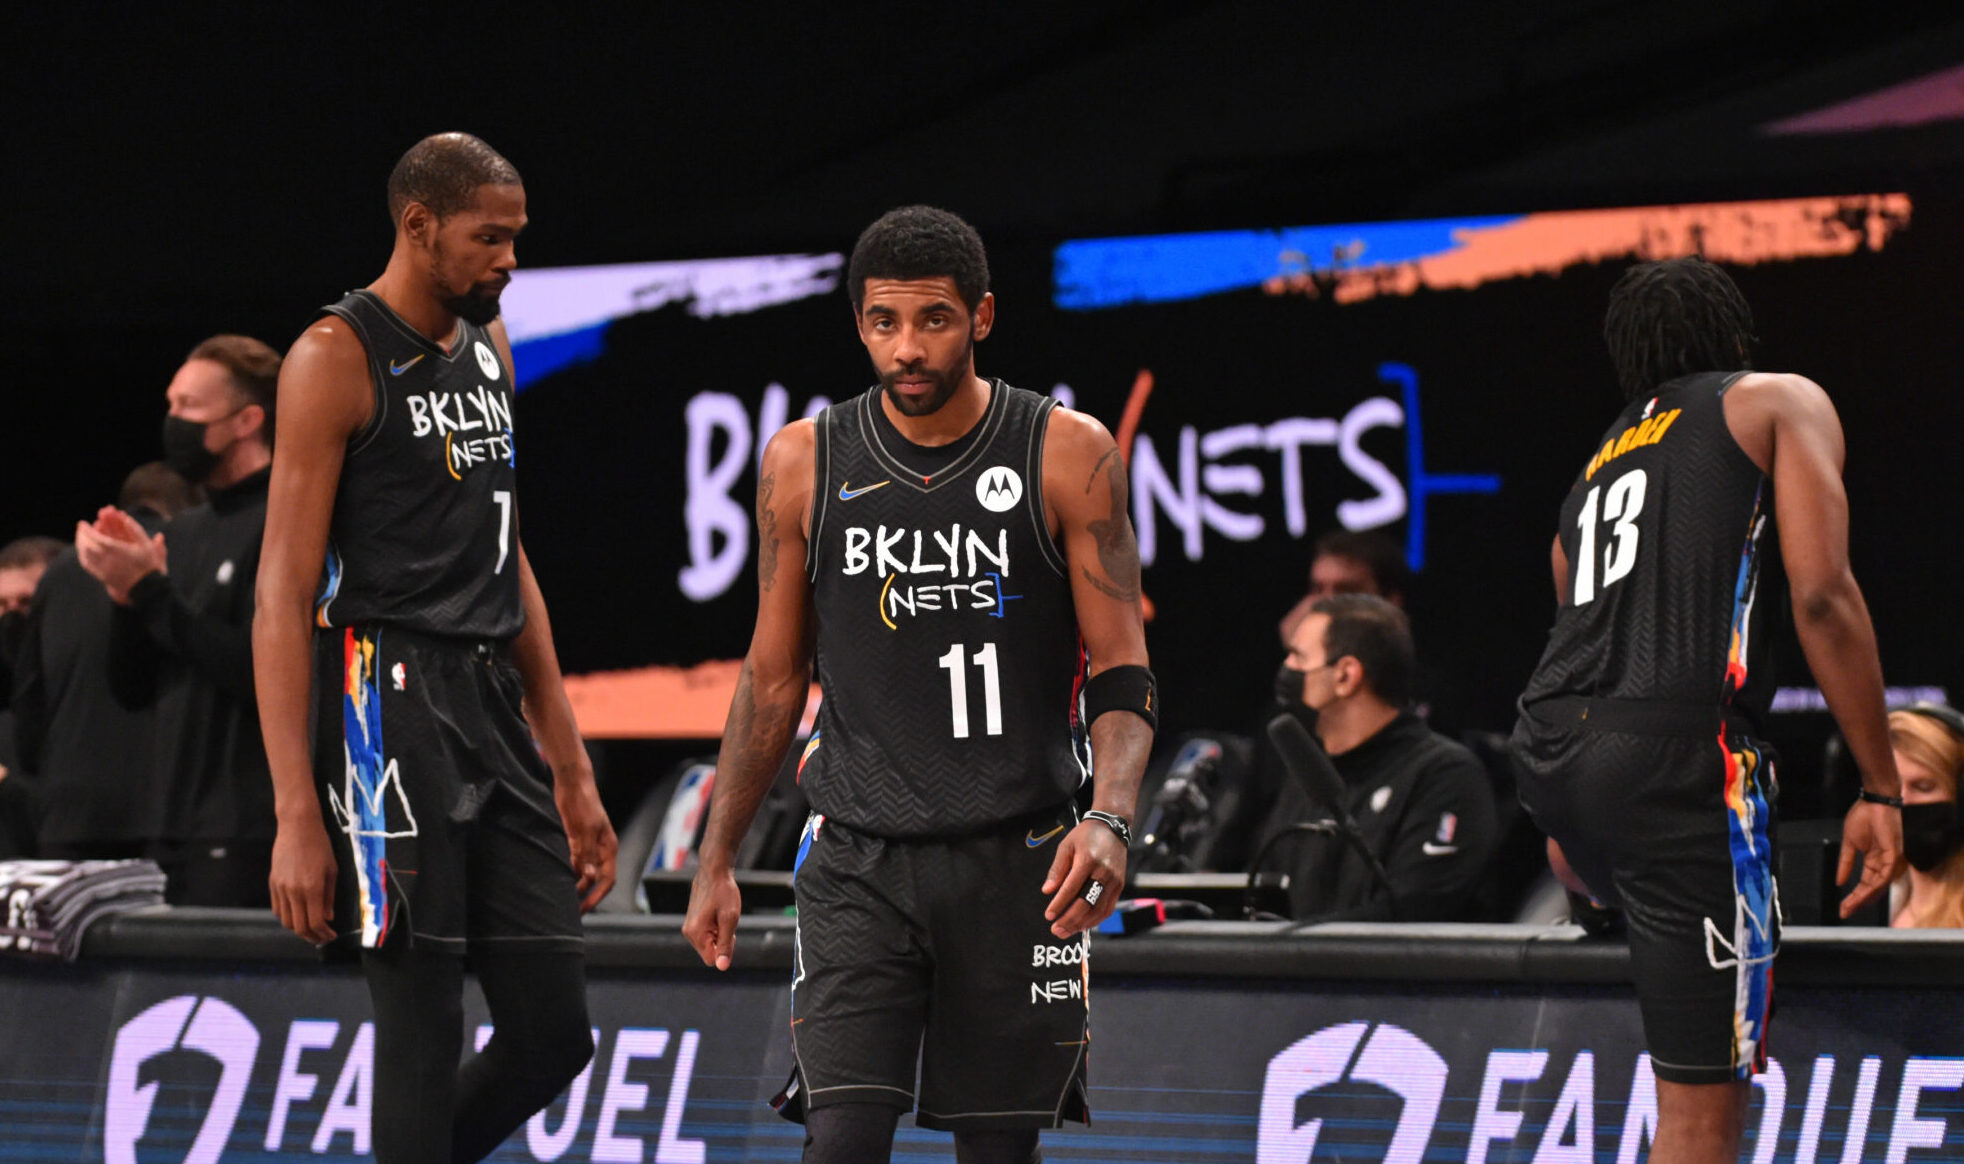 Nets' Big 3 finally in action together, ending 3-month absence